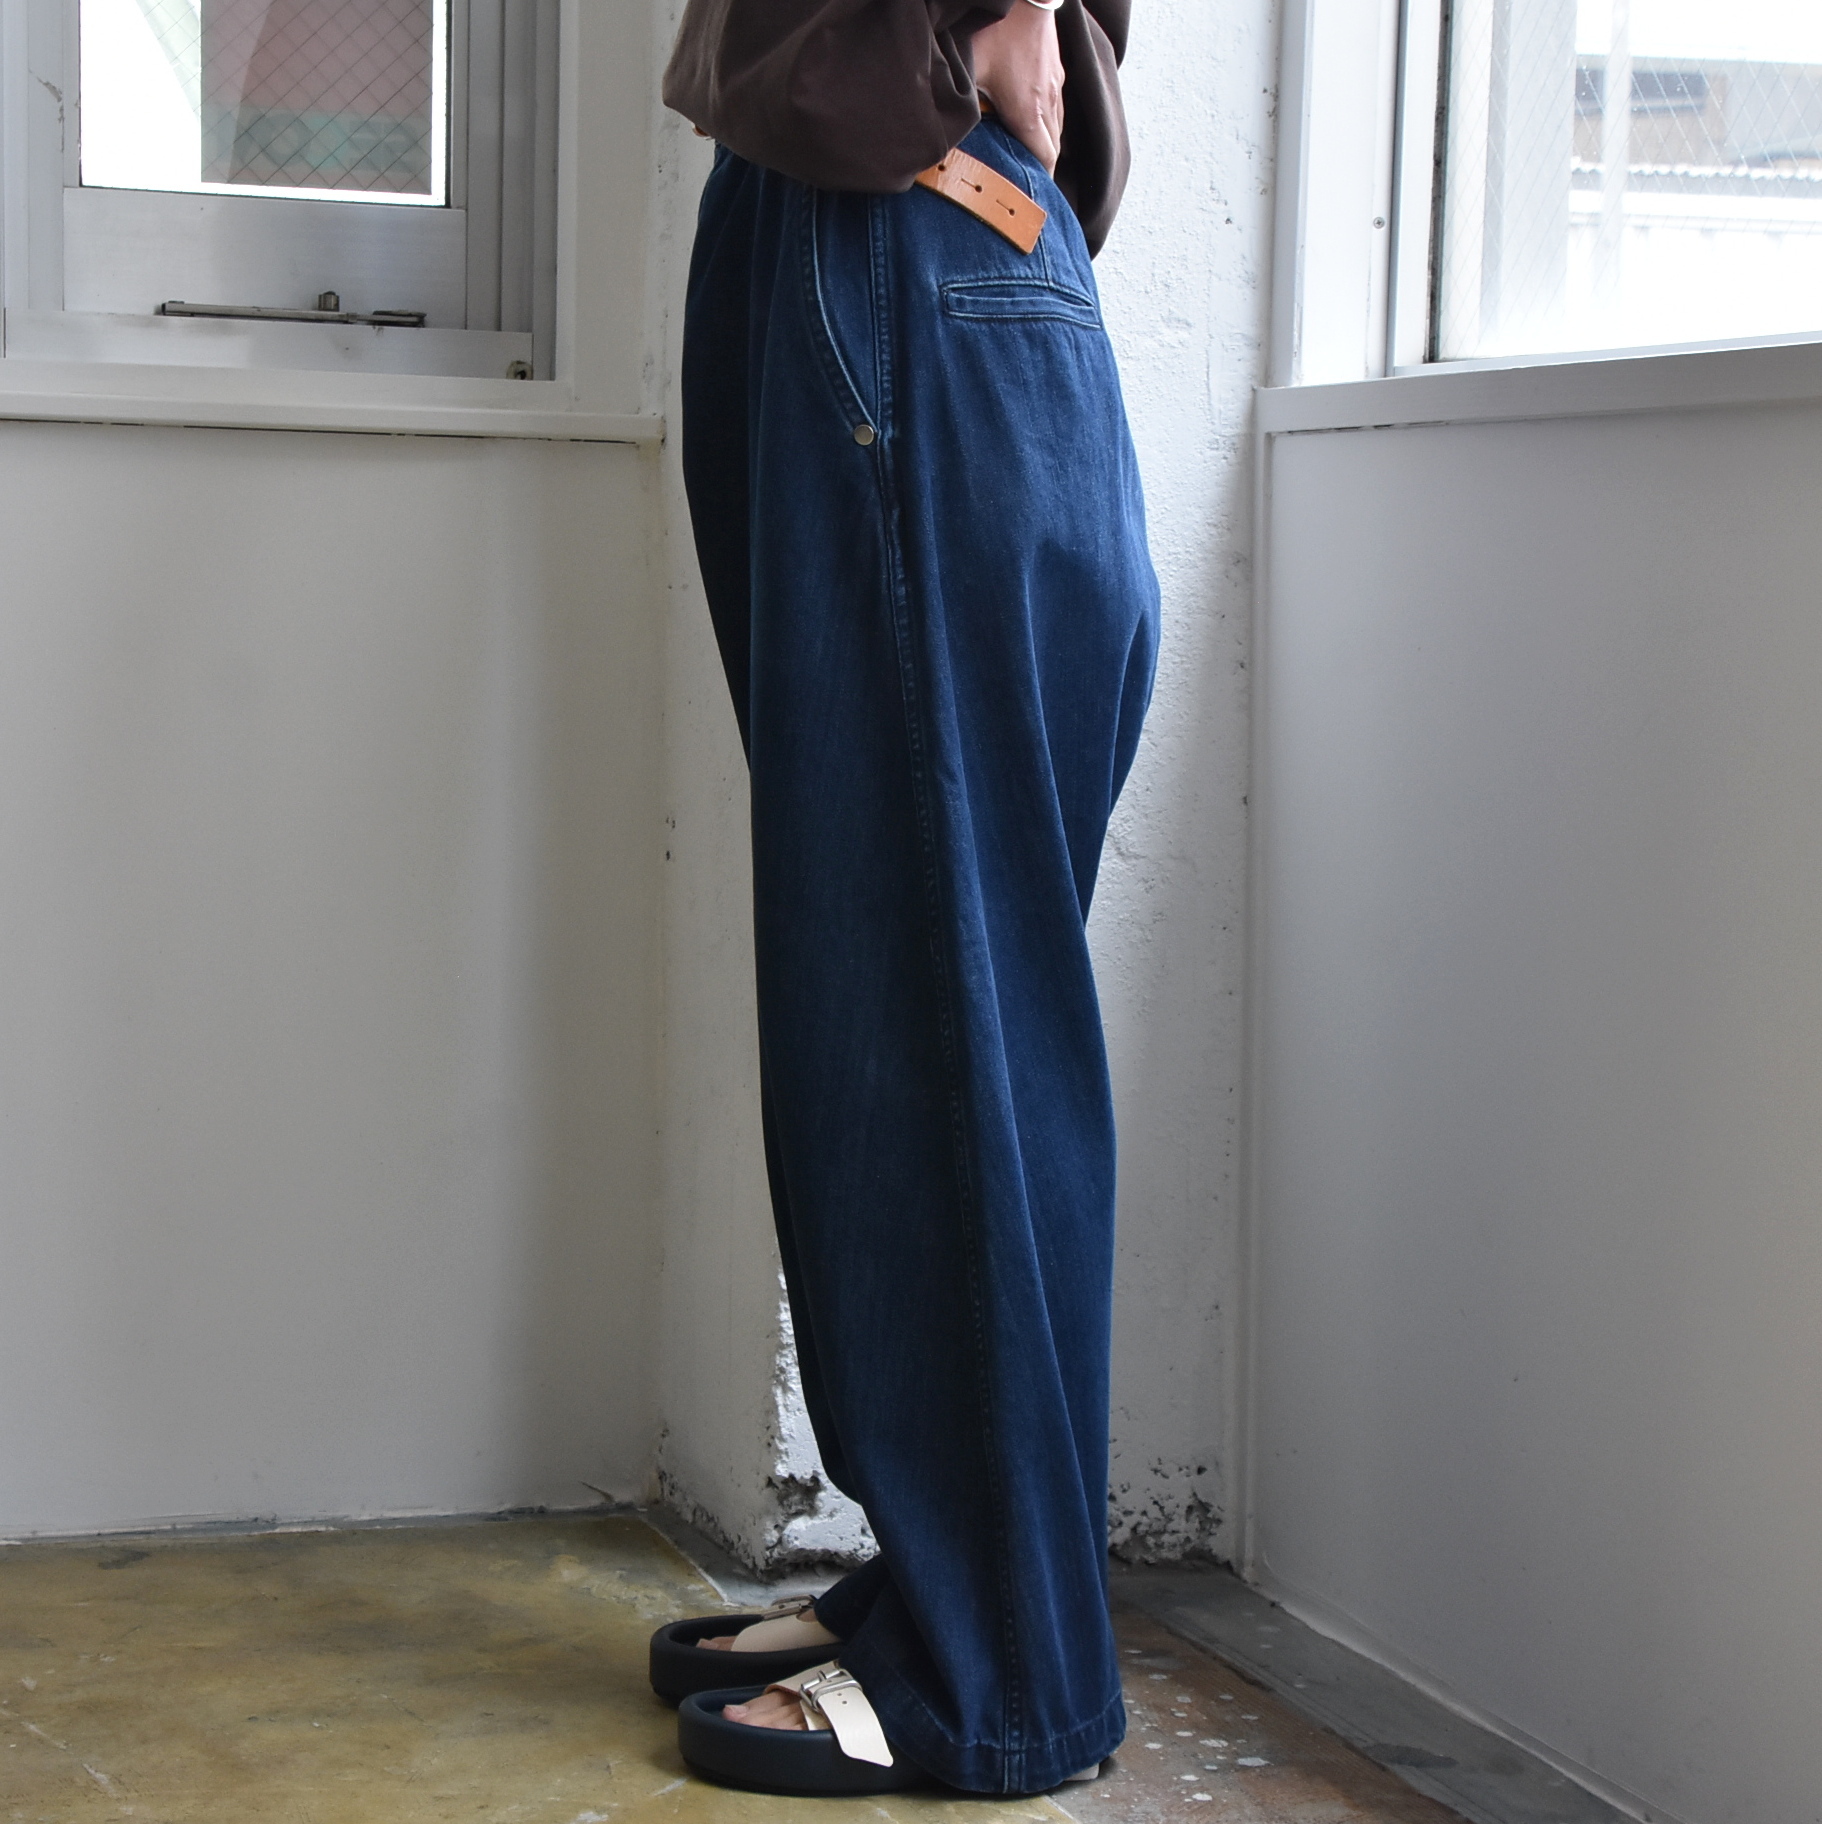 SOFIE D'HOORE(\tB[h[) / Jeans with thigh pockety2FWJz#PLATO-AA(5)